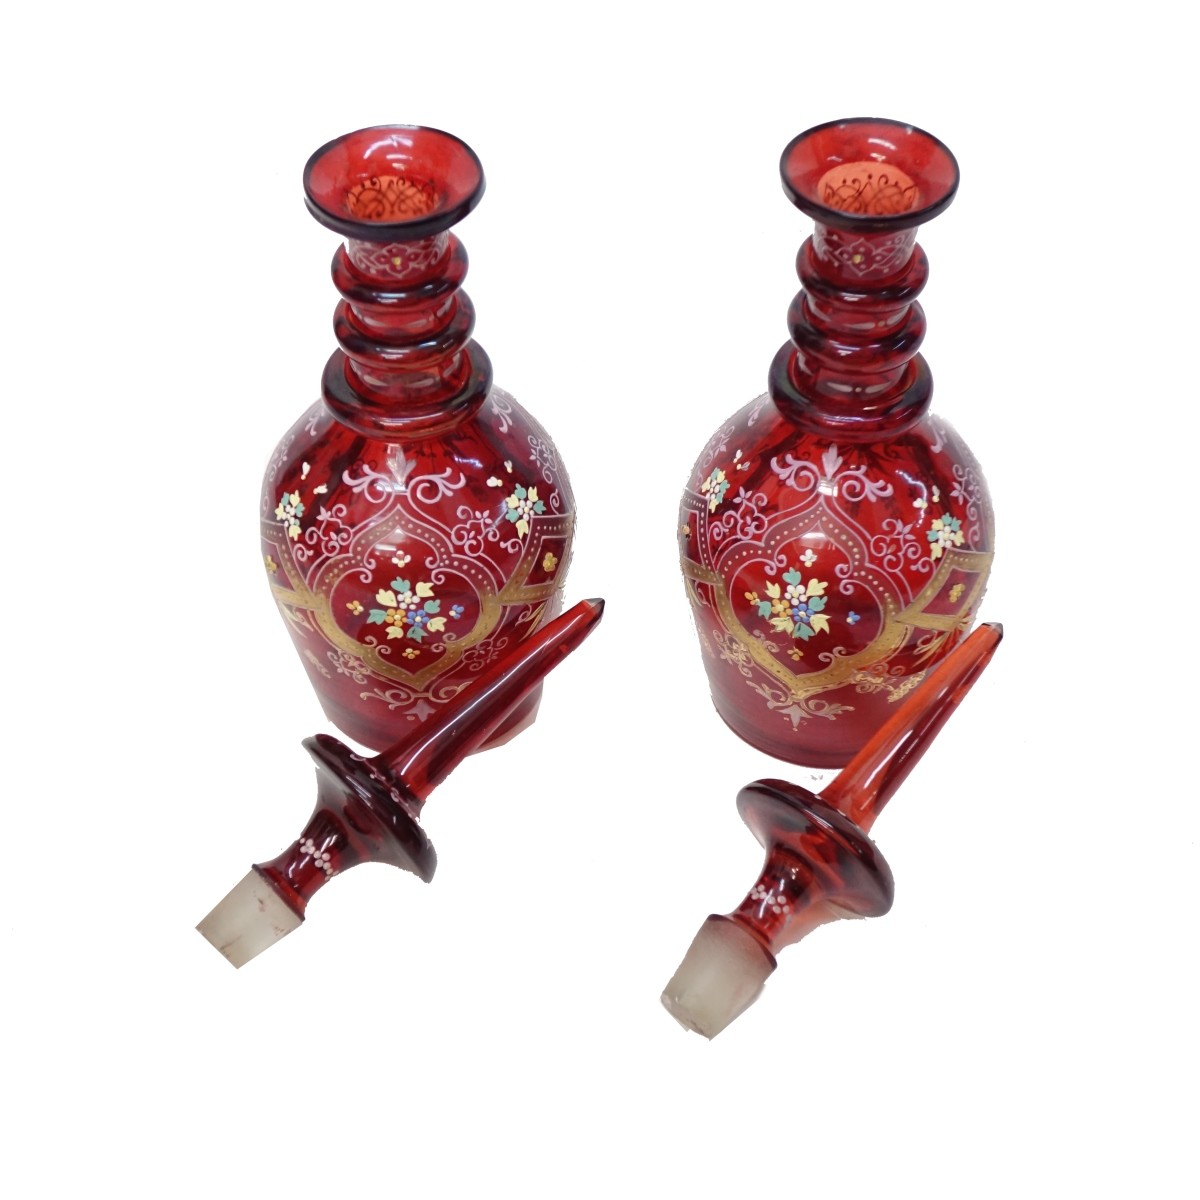 Pair of Bohemian Glass Decanters